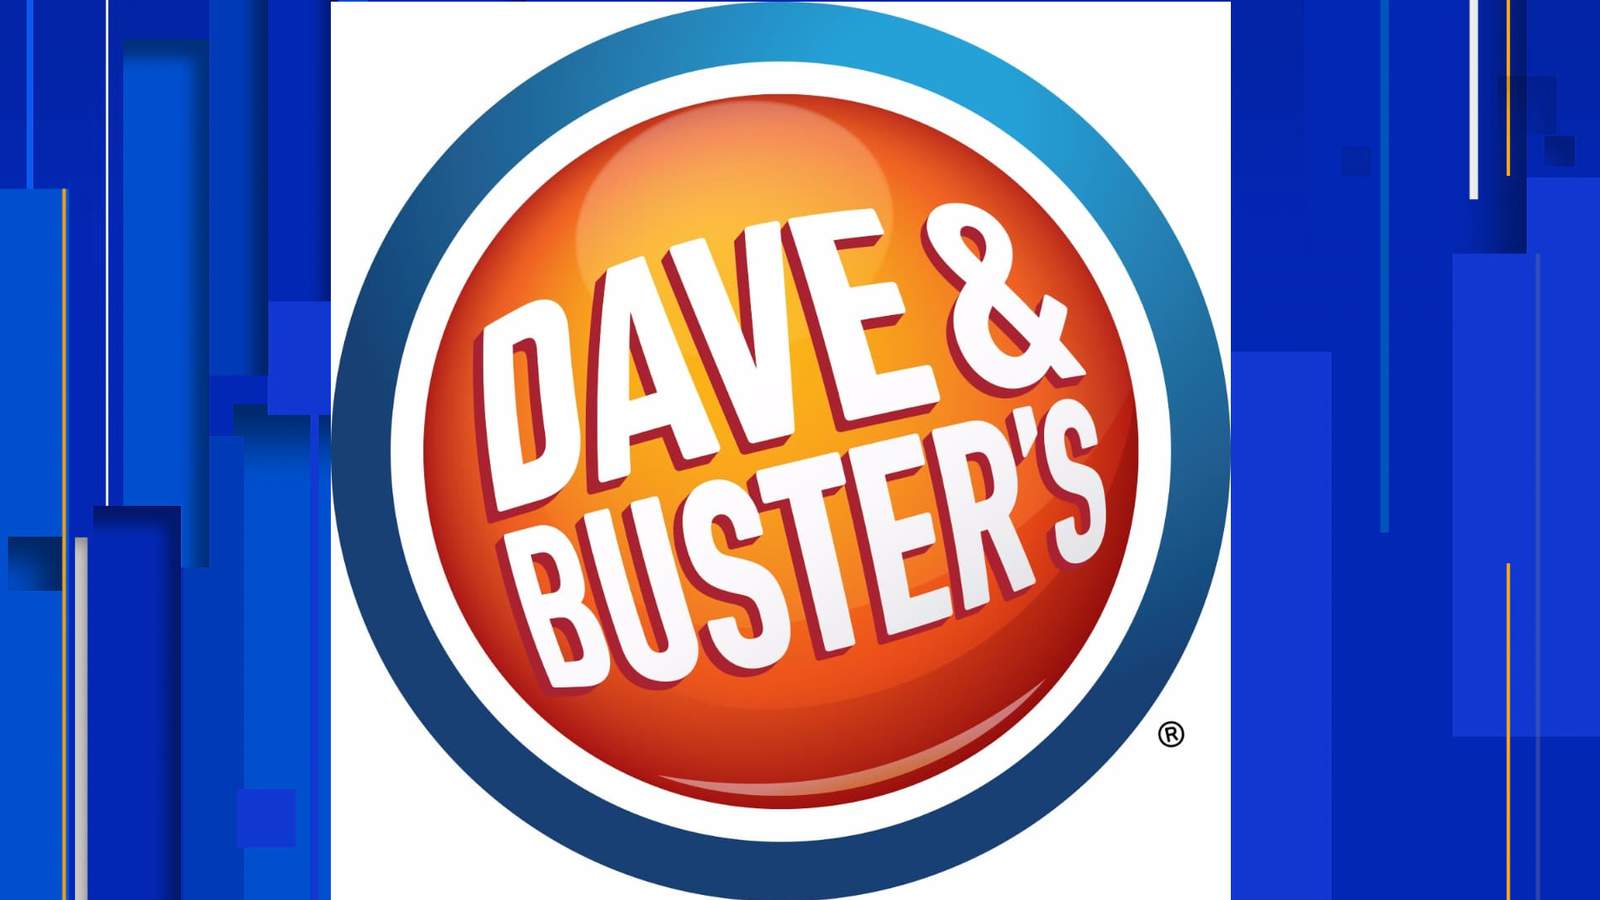 Dave & Busters reopens 1 of 2 San Antonio locations